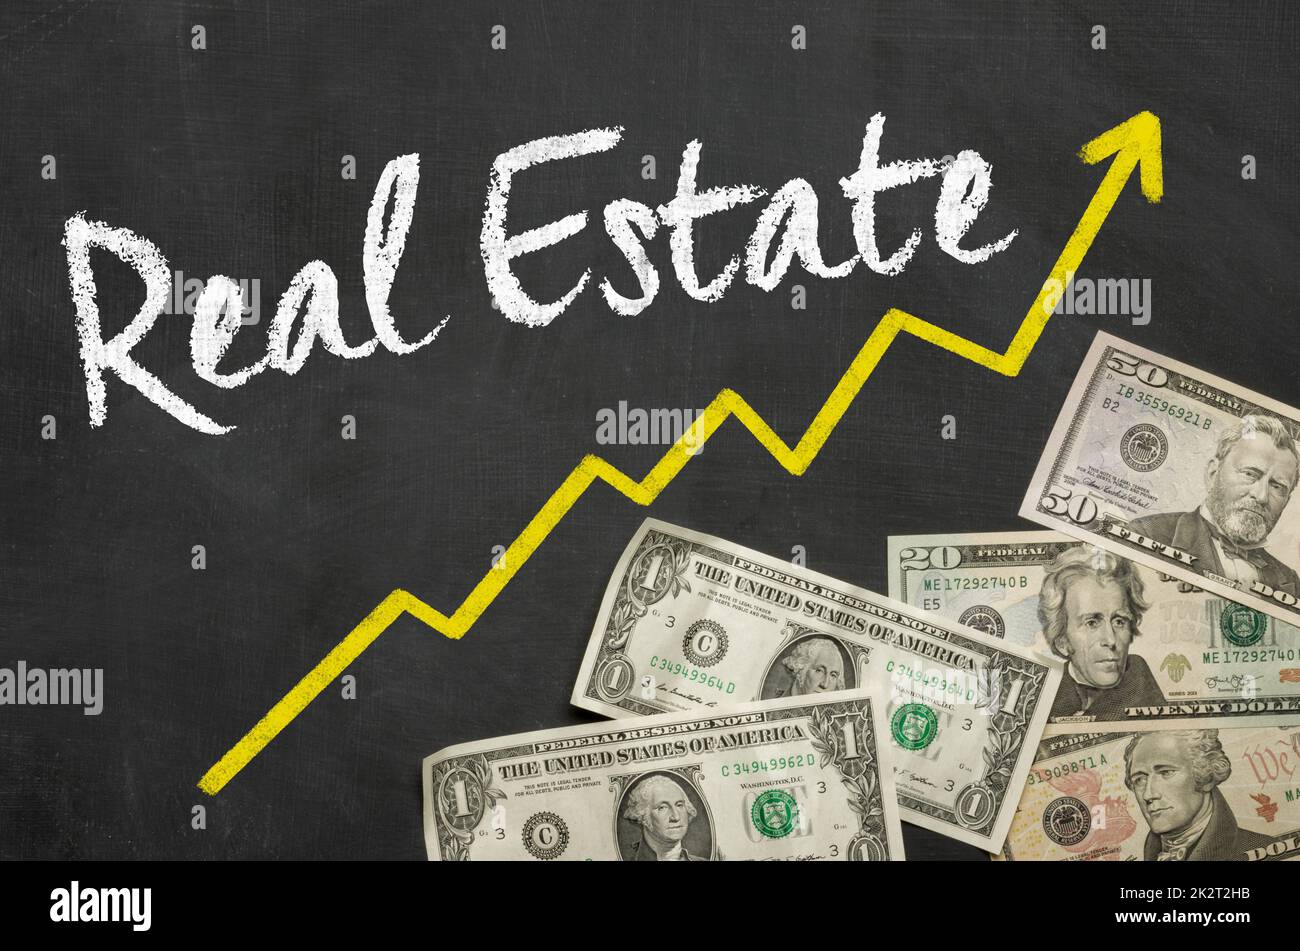 Text on blackboard with Dollars - Real Estate Stock Photo